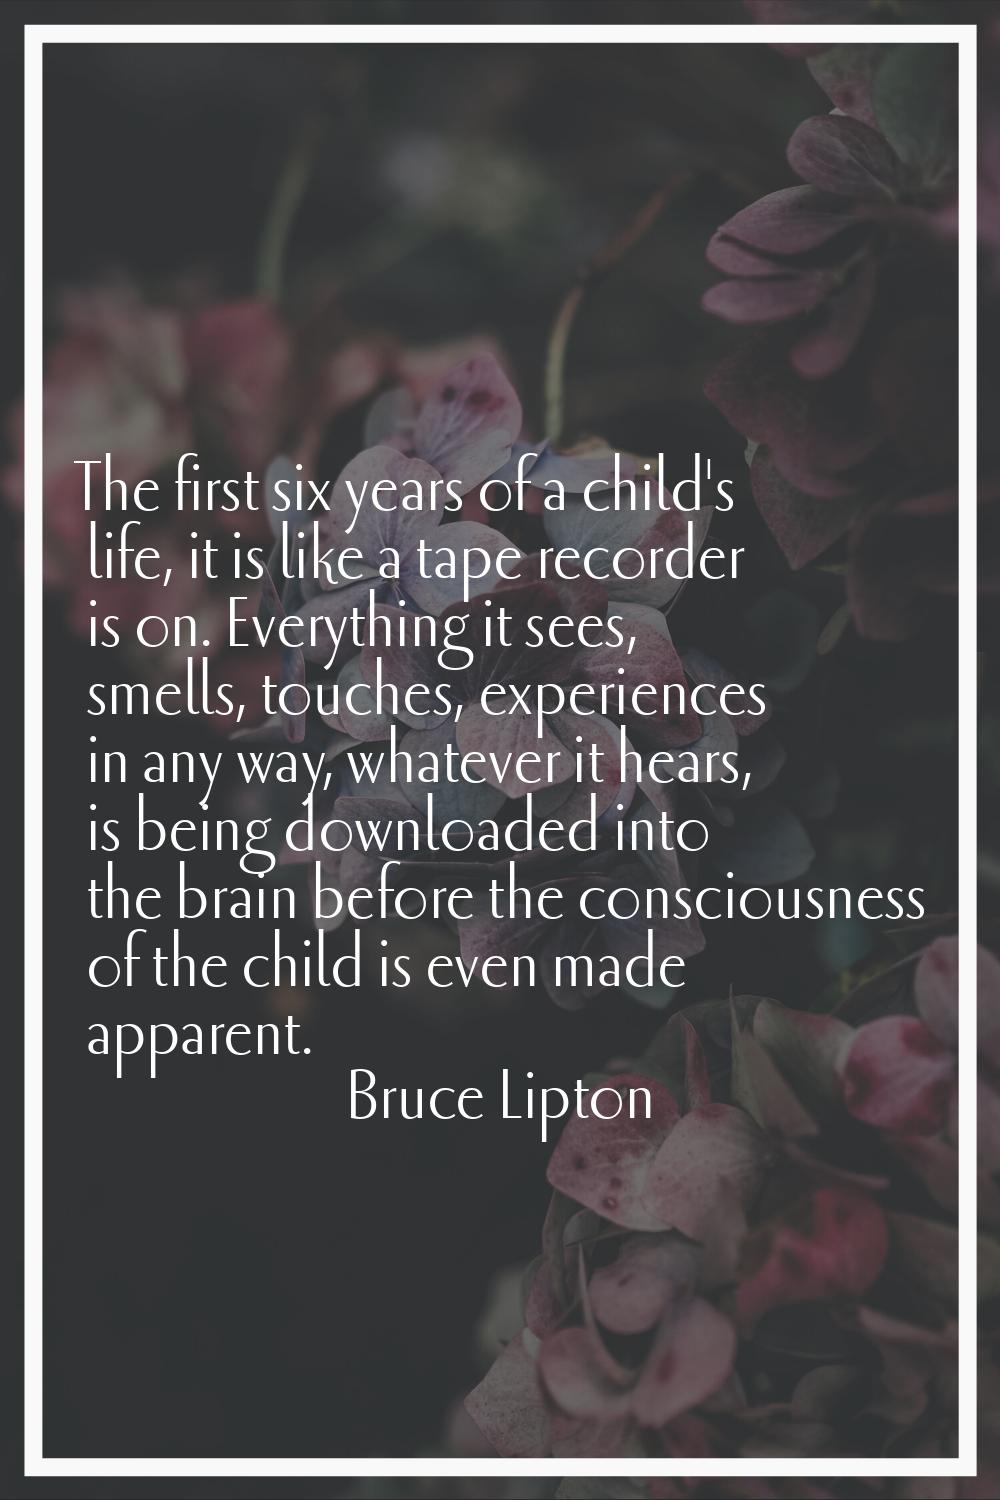 The first six years of a child's life, it is like a tape recorder is on. Everything it sees, smells